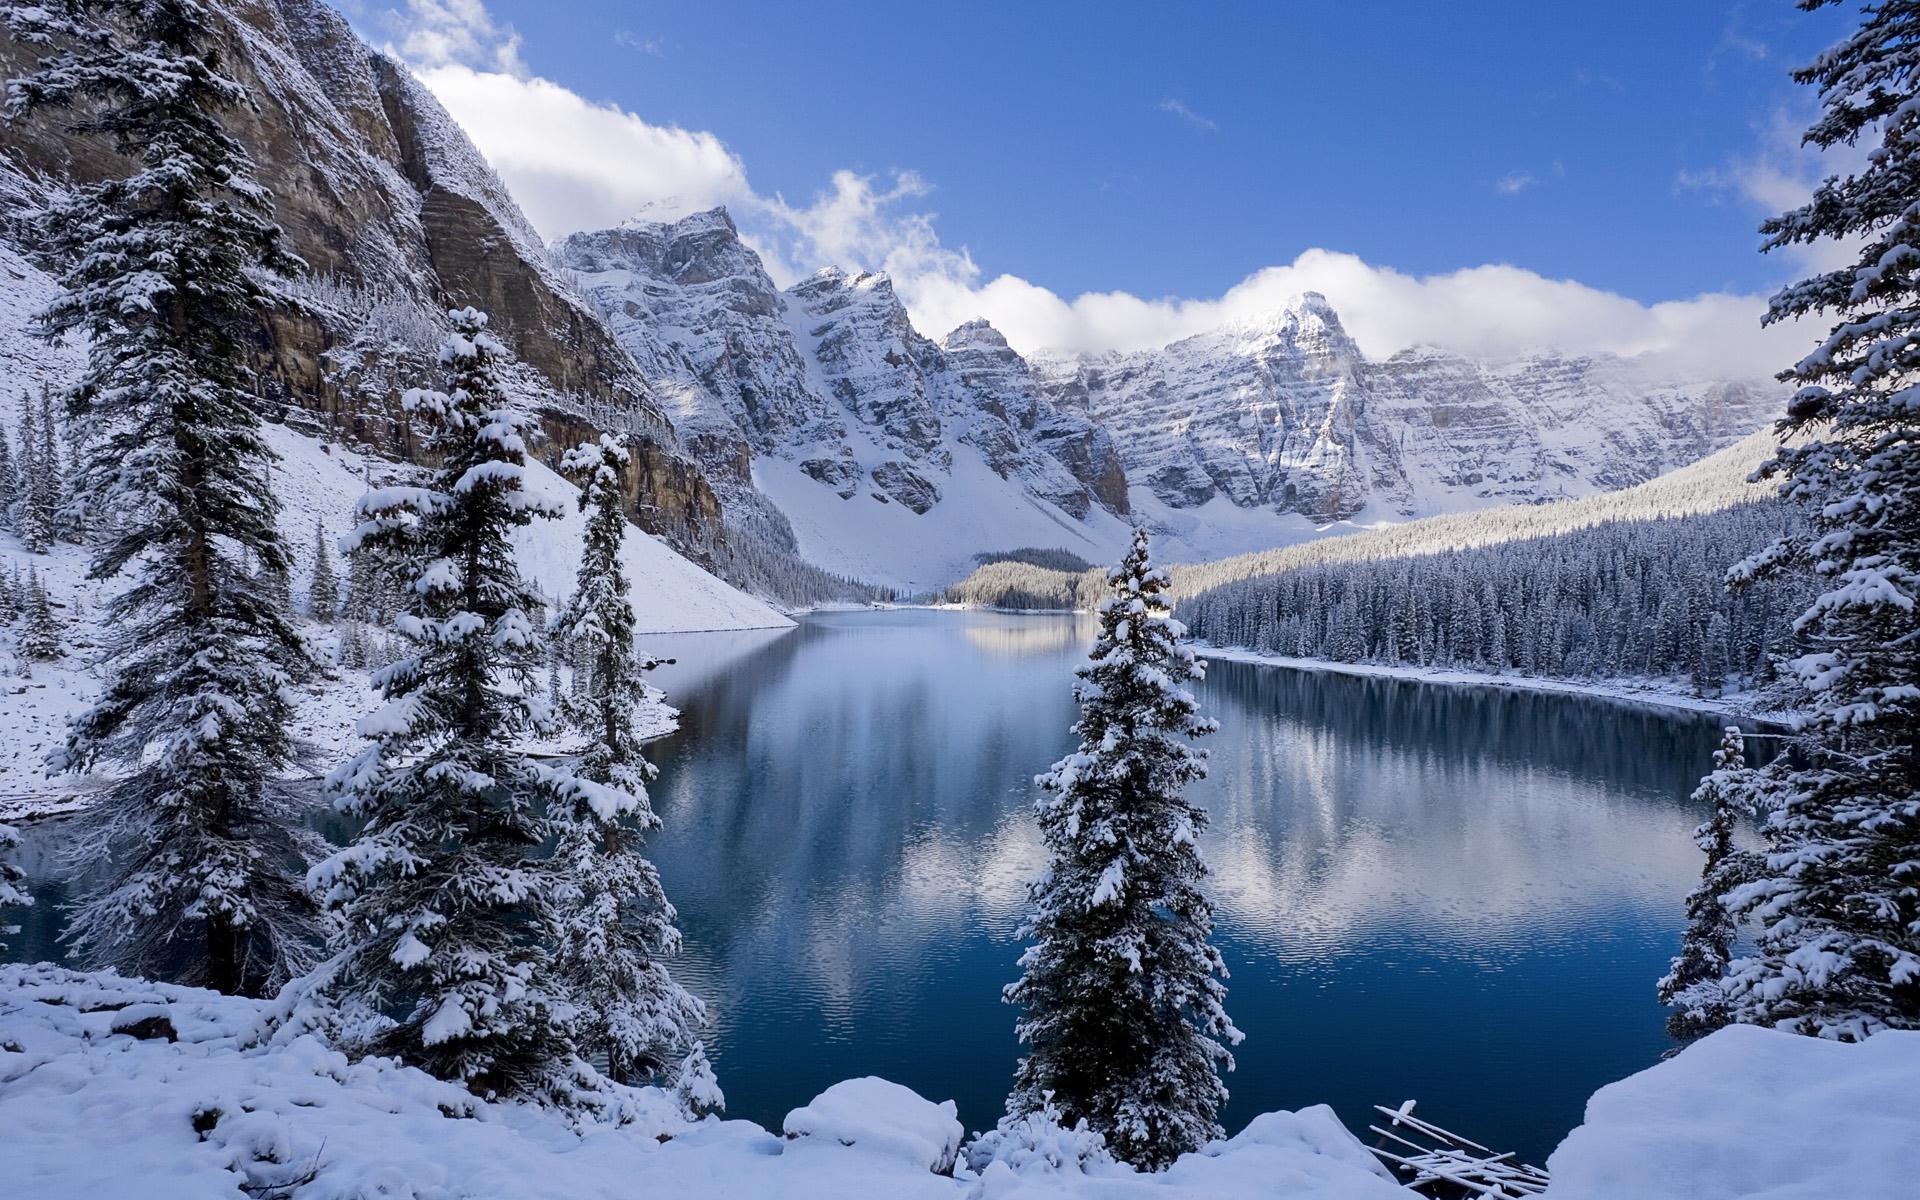  2015 By Stephen Comments Off on Winter Scenes for Desktop Wallpapers